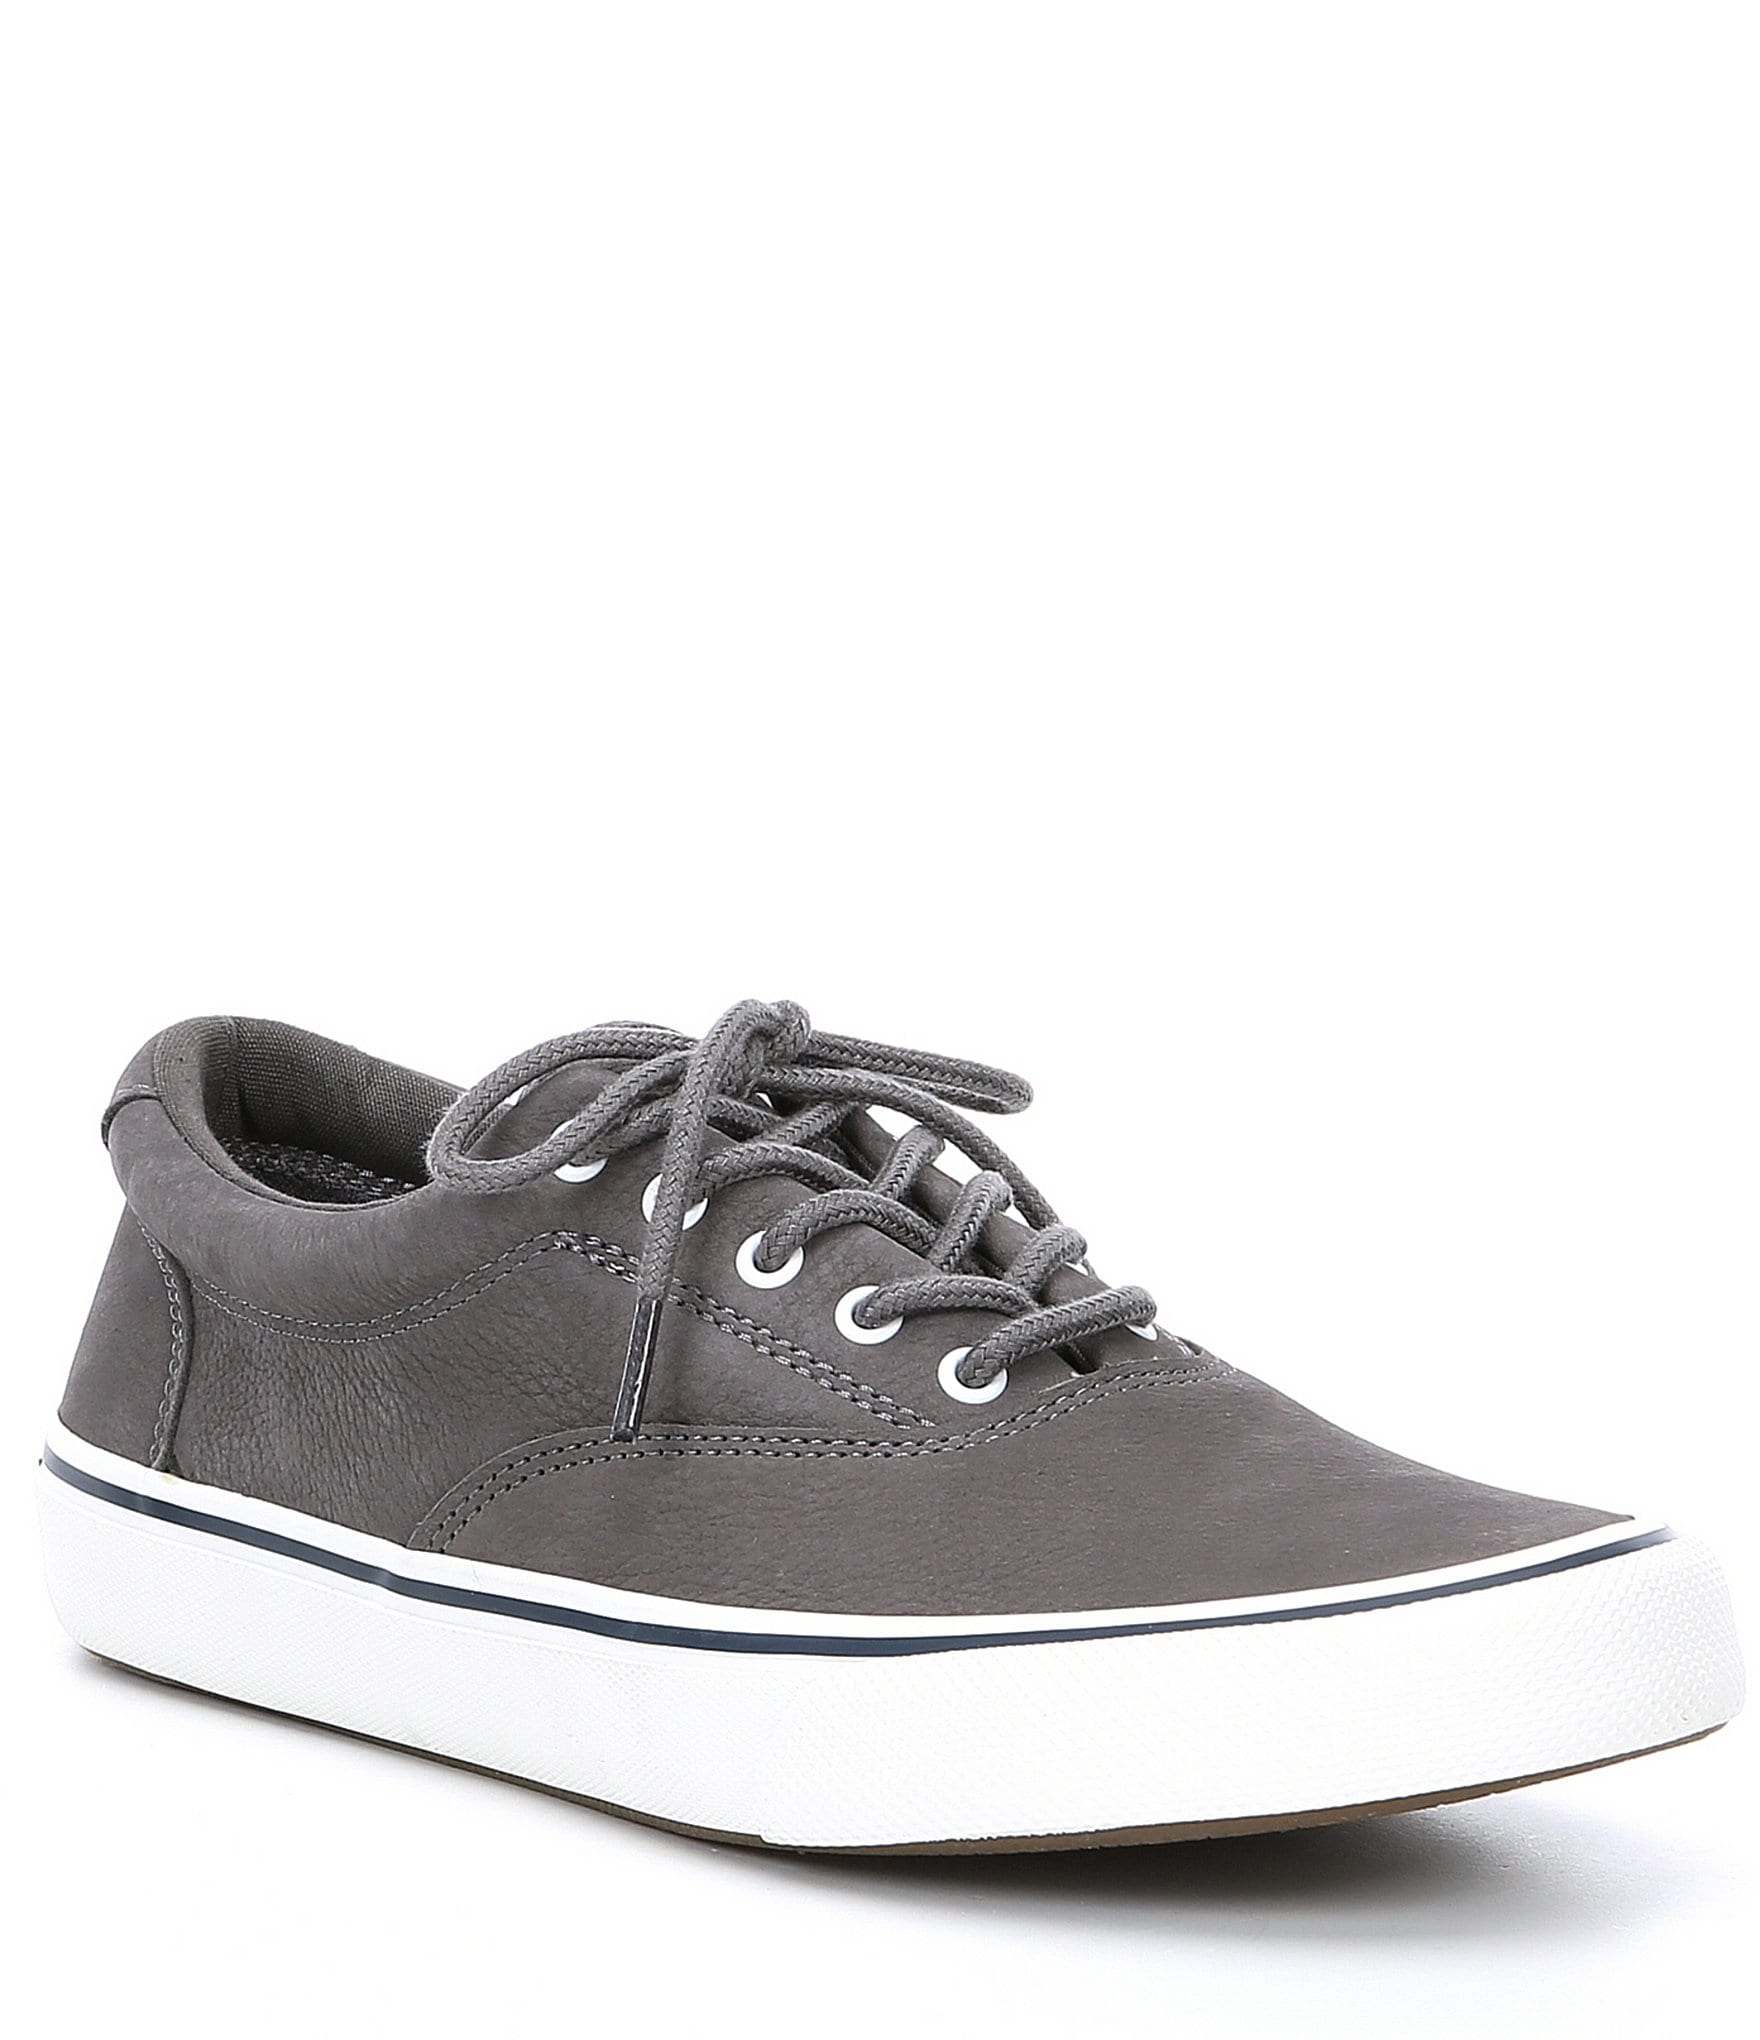 mens grey leather sneakers